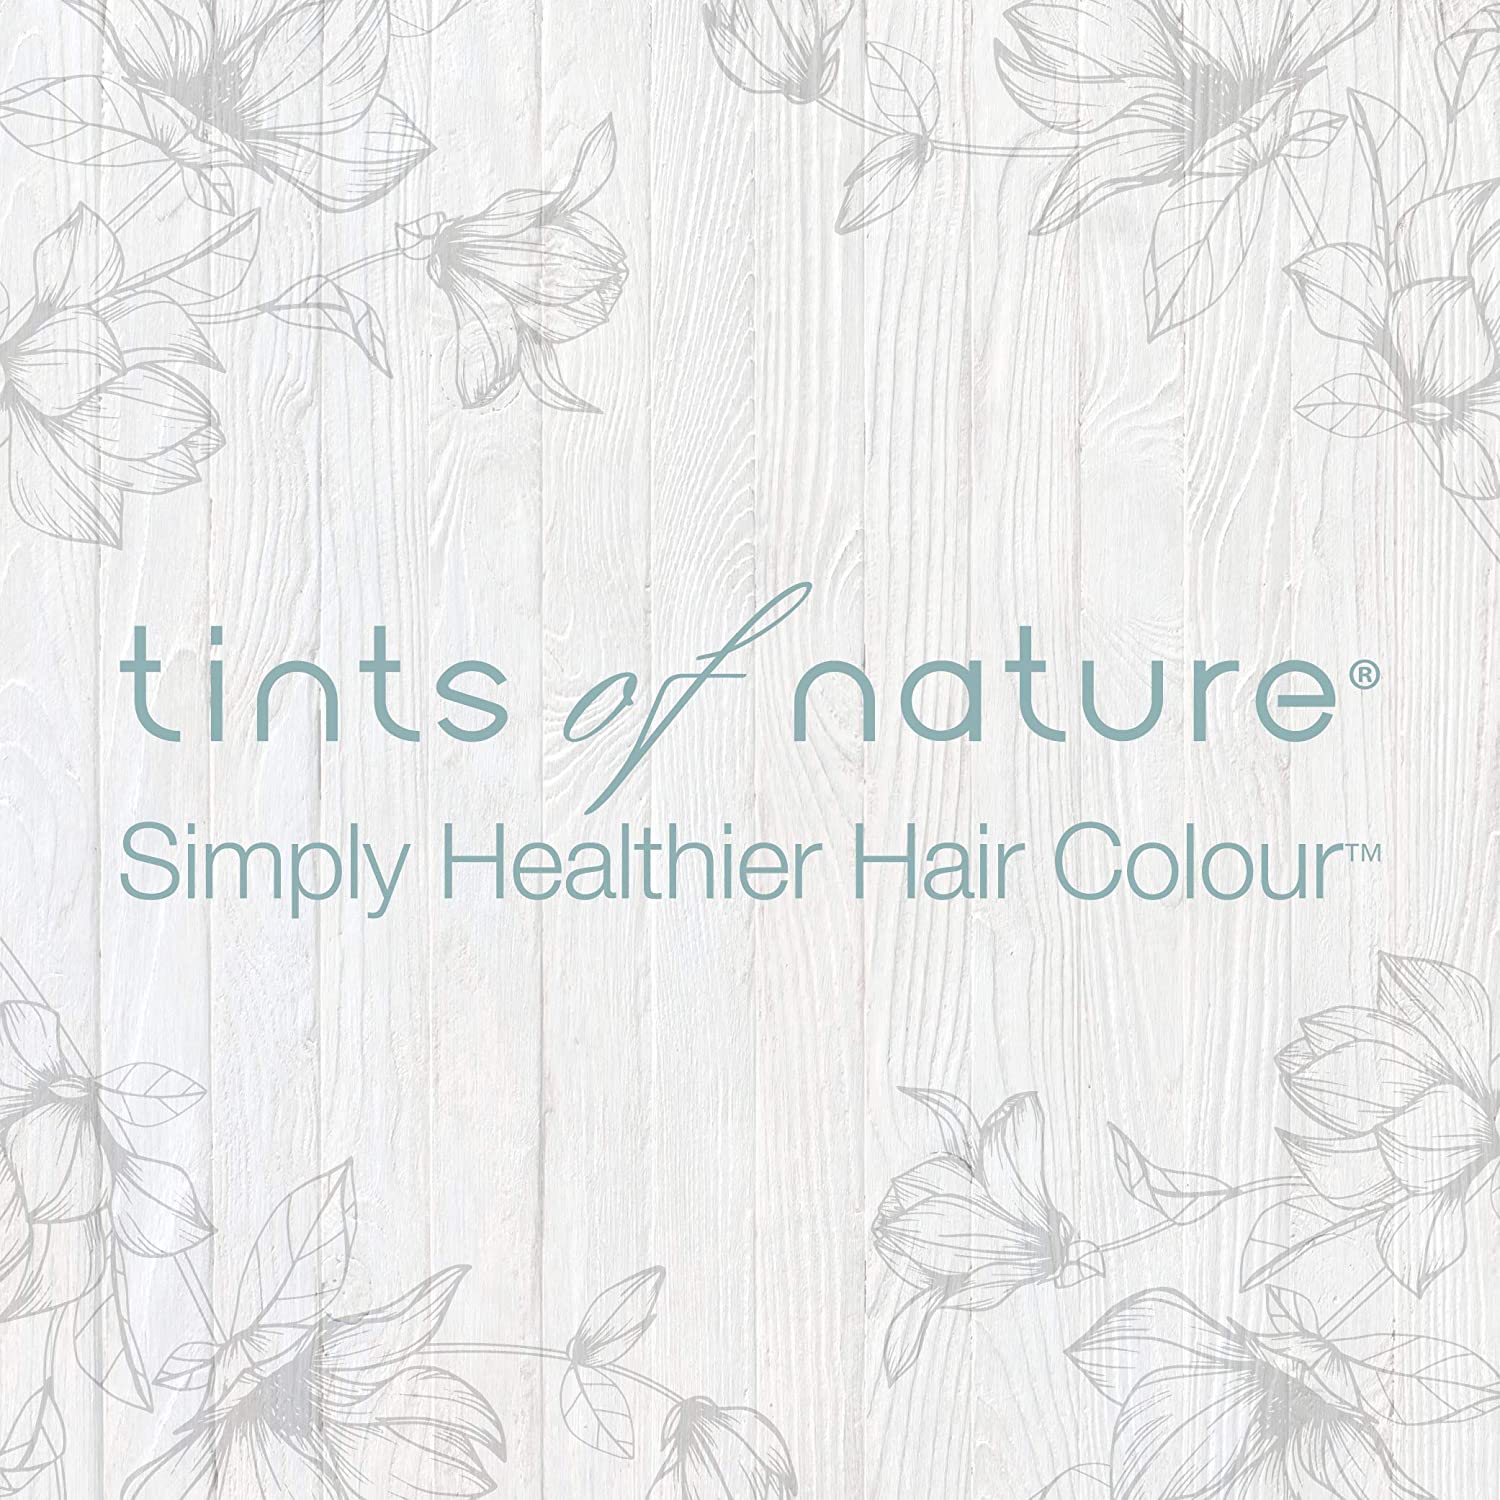 Tints of Nature Natural Light Brown Permanent Hair Dye 5N Nourishes Hair & Covers Greys - Single Pack, (5n) ‎light